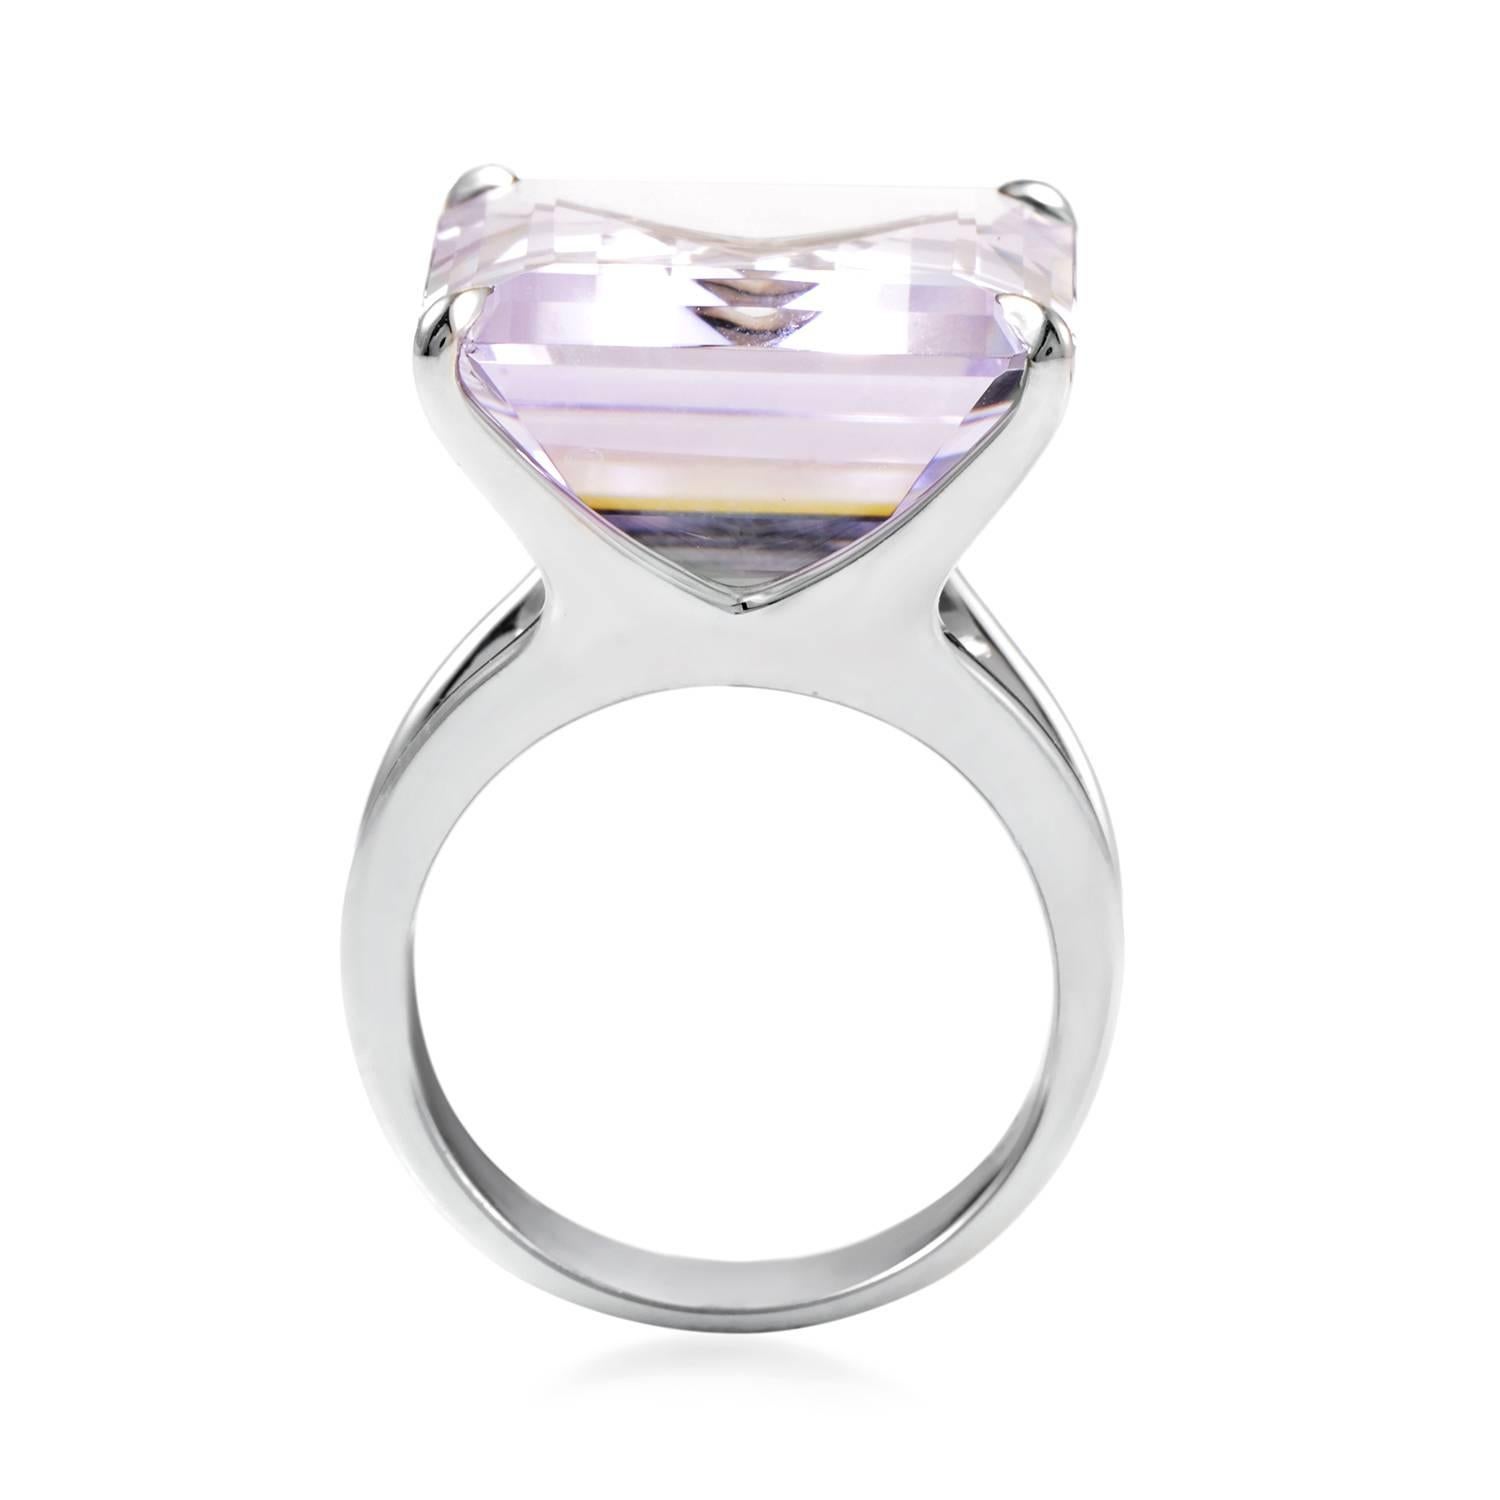 Eye-catching with its bright tone and captivating with its fascinating glistening depth, the wonderfully shaped amethyst tastefully complements the elegant 18K white gold body of this outstanding ring from H.Stern, while a delicate diamond is placed